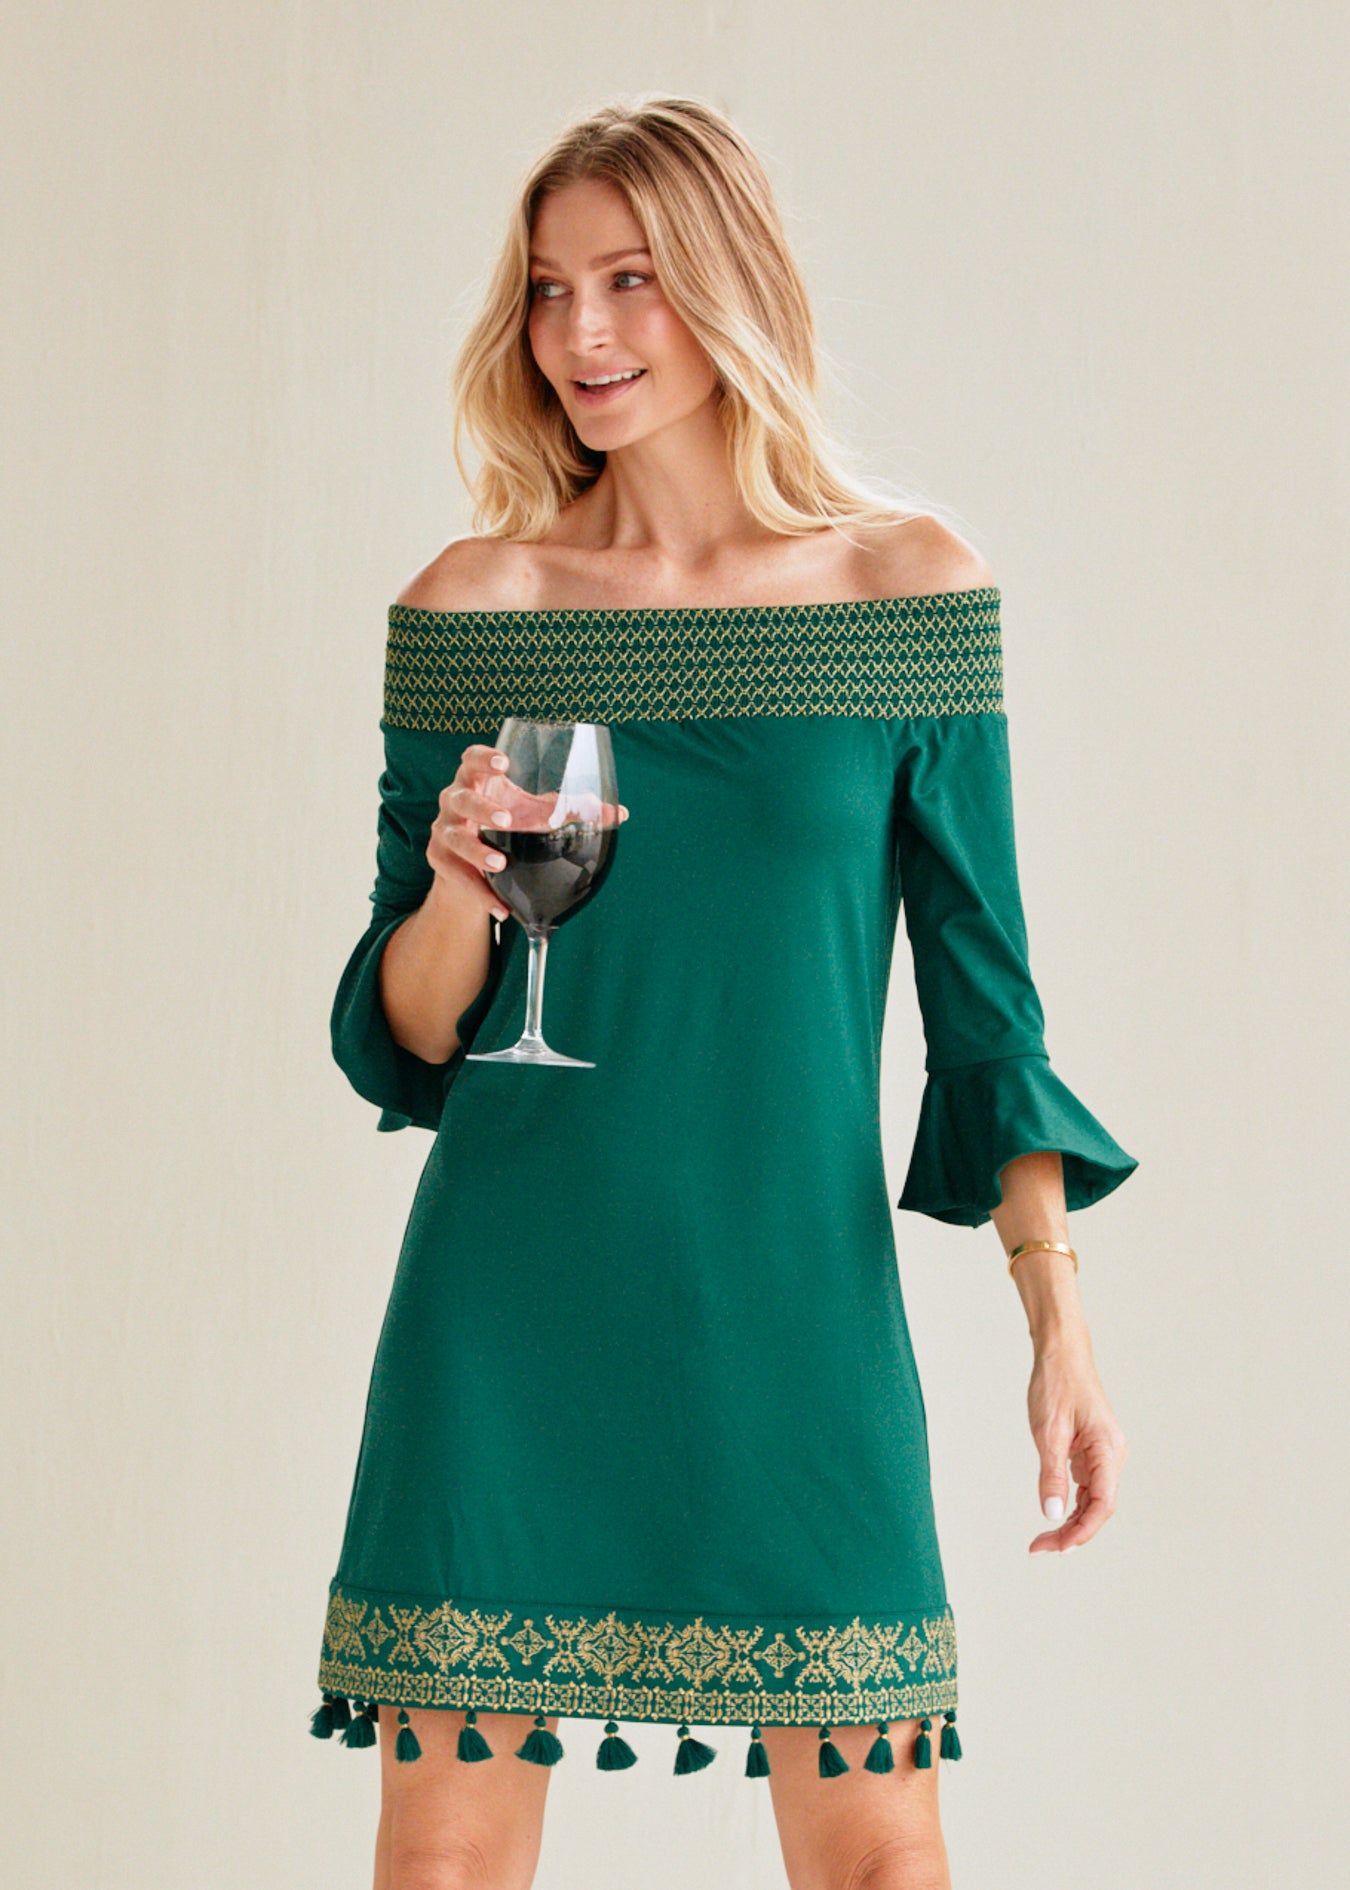 Festive woman in emerald green with gold off the shoulder dress.